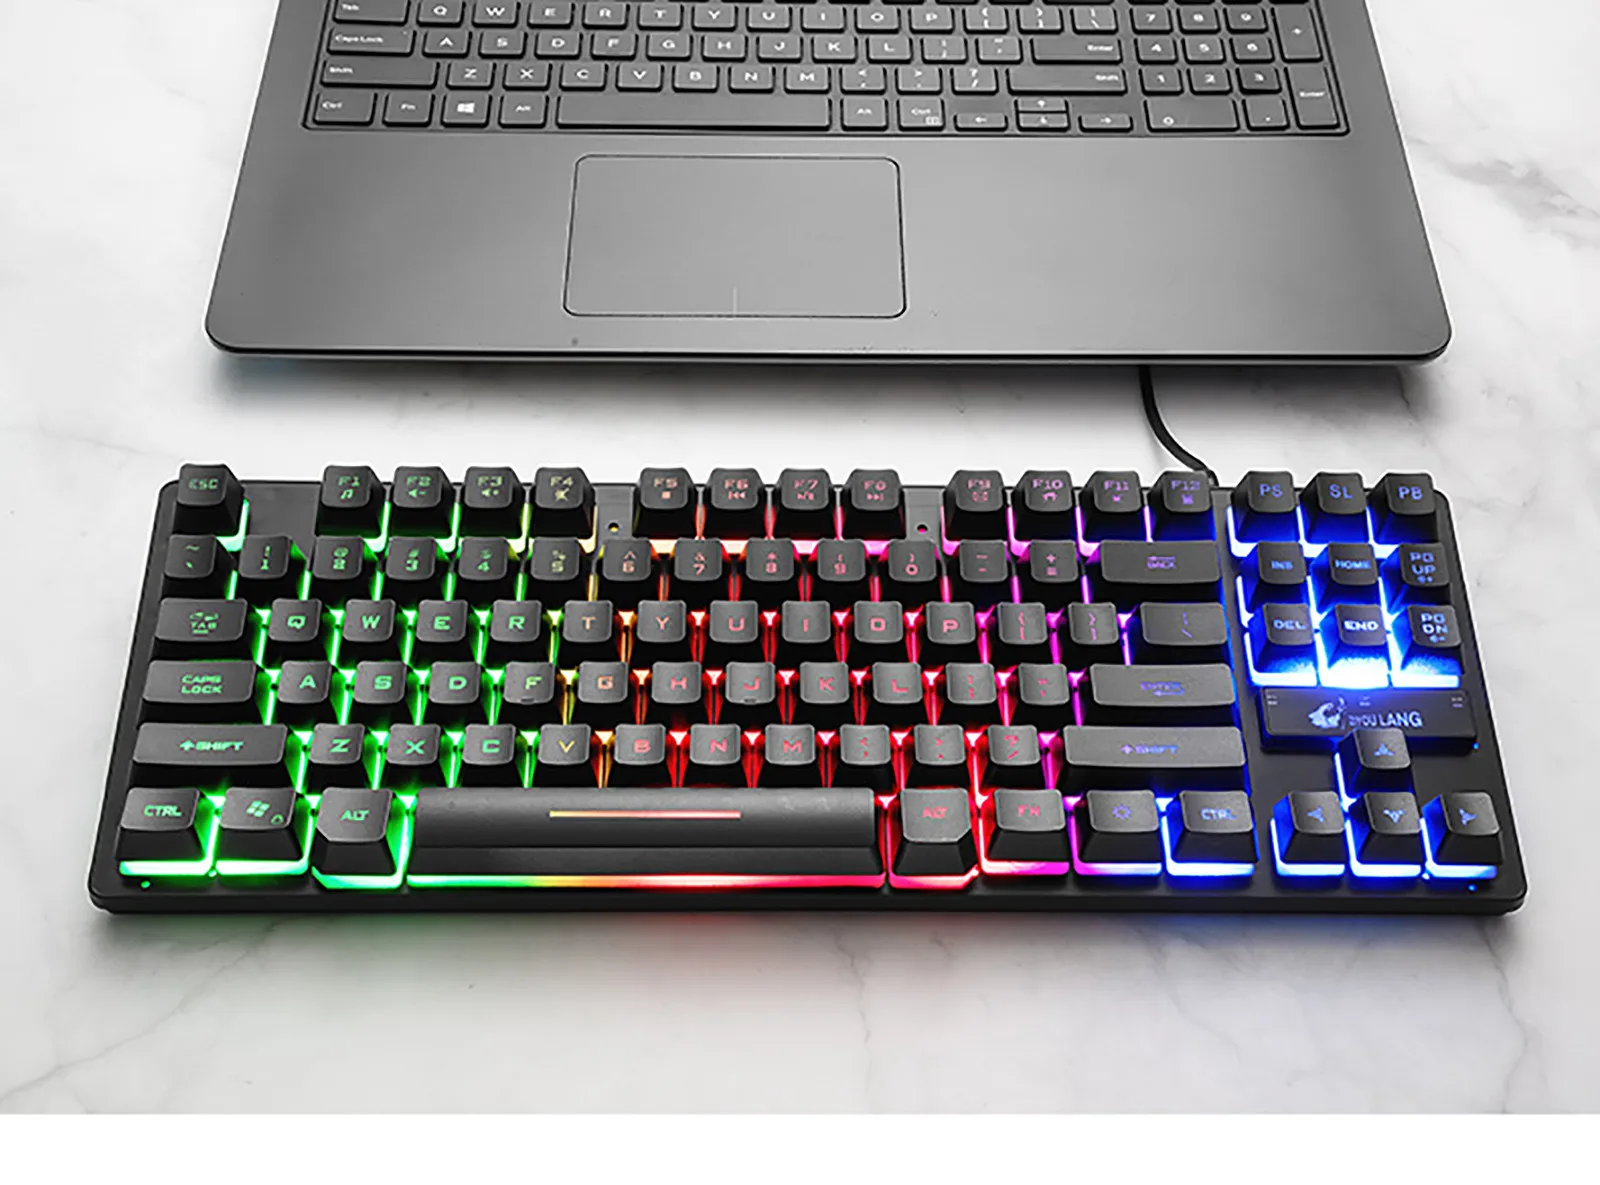 

2021 HIPERDEAL(HIPERDEAL) New And High Quality K16 Wired Game keyboard 87keys w/ Retro-illuminated LED Waterproof Ergonomic